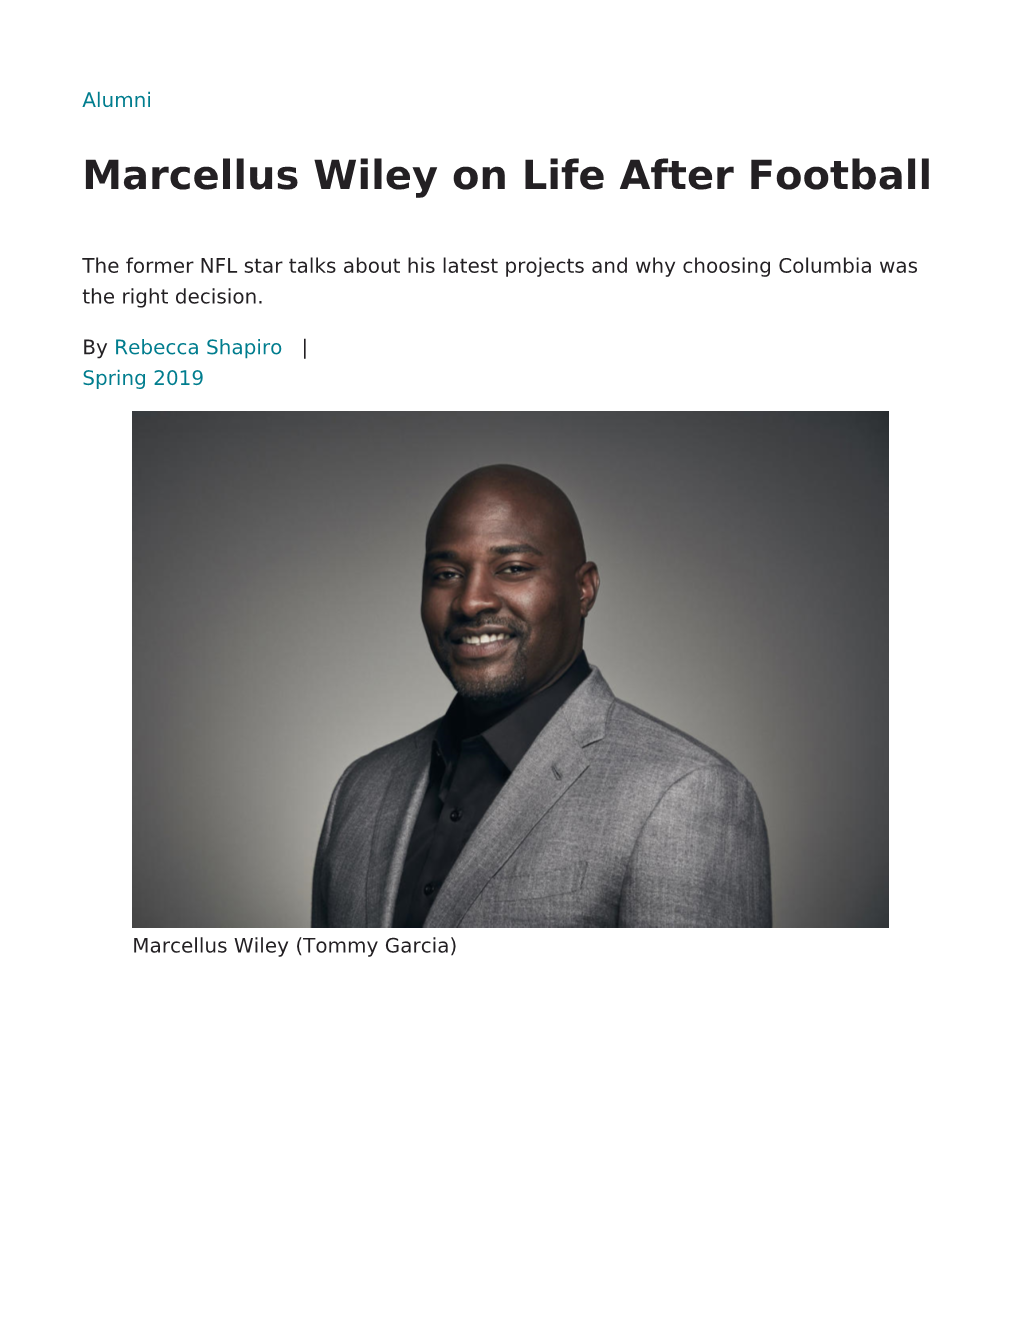 Marcellus Wiley on Life After Football